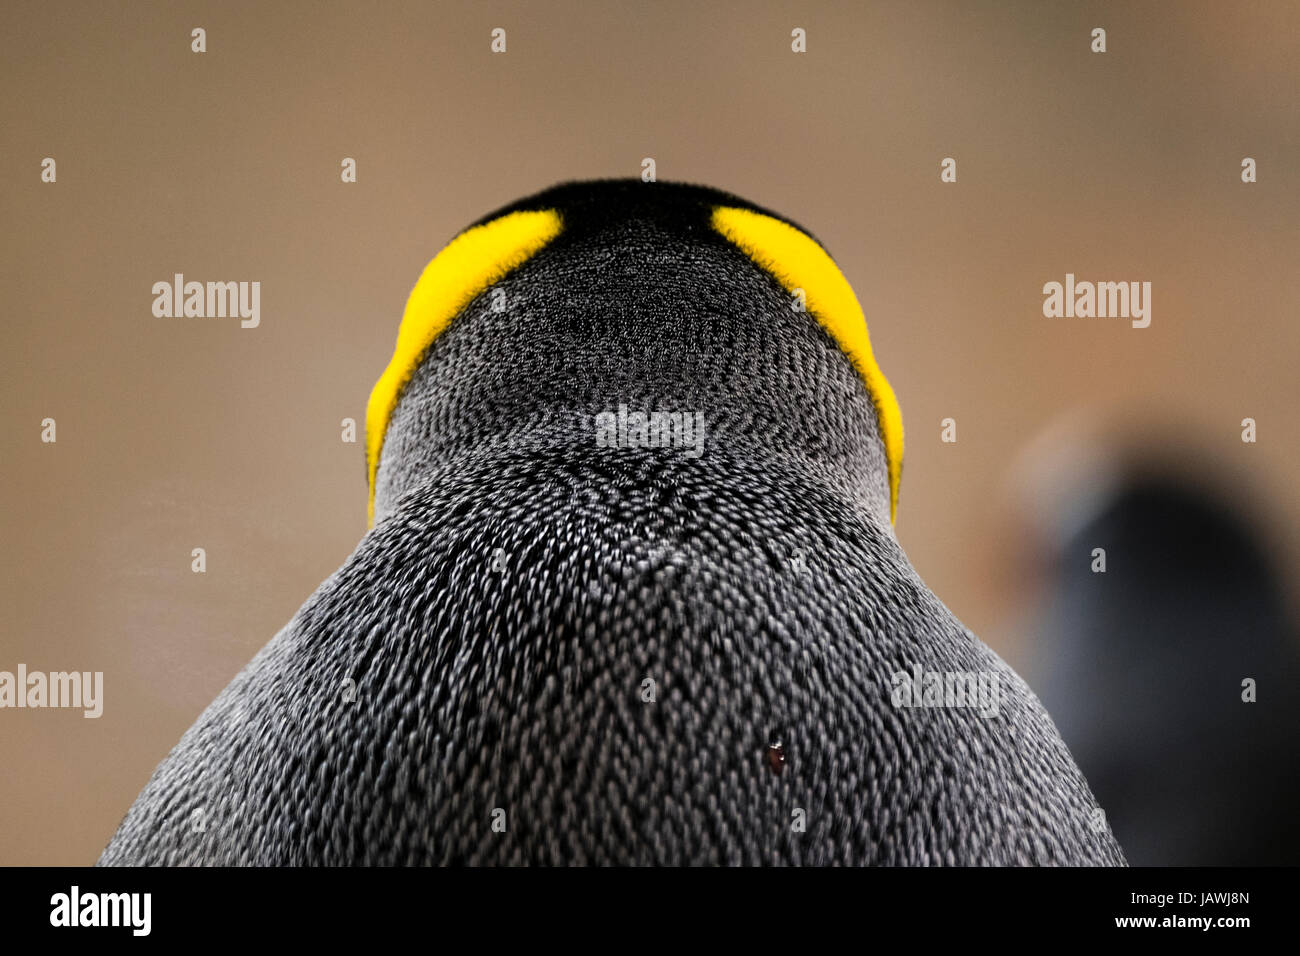 Bright yellow-orange head and neck feather plumage on a King Penguin. Stock Photo